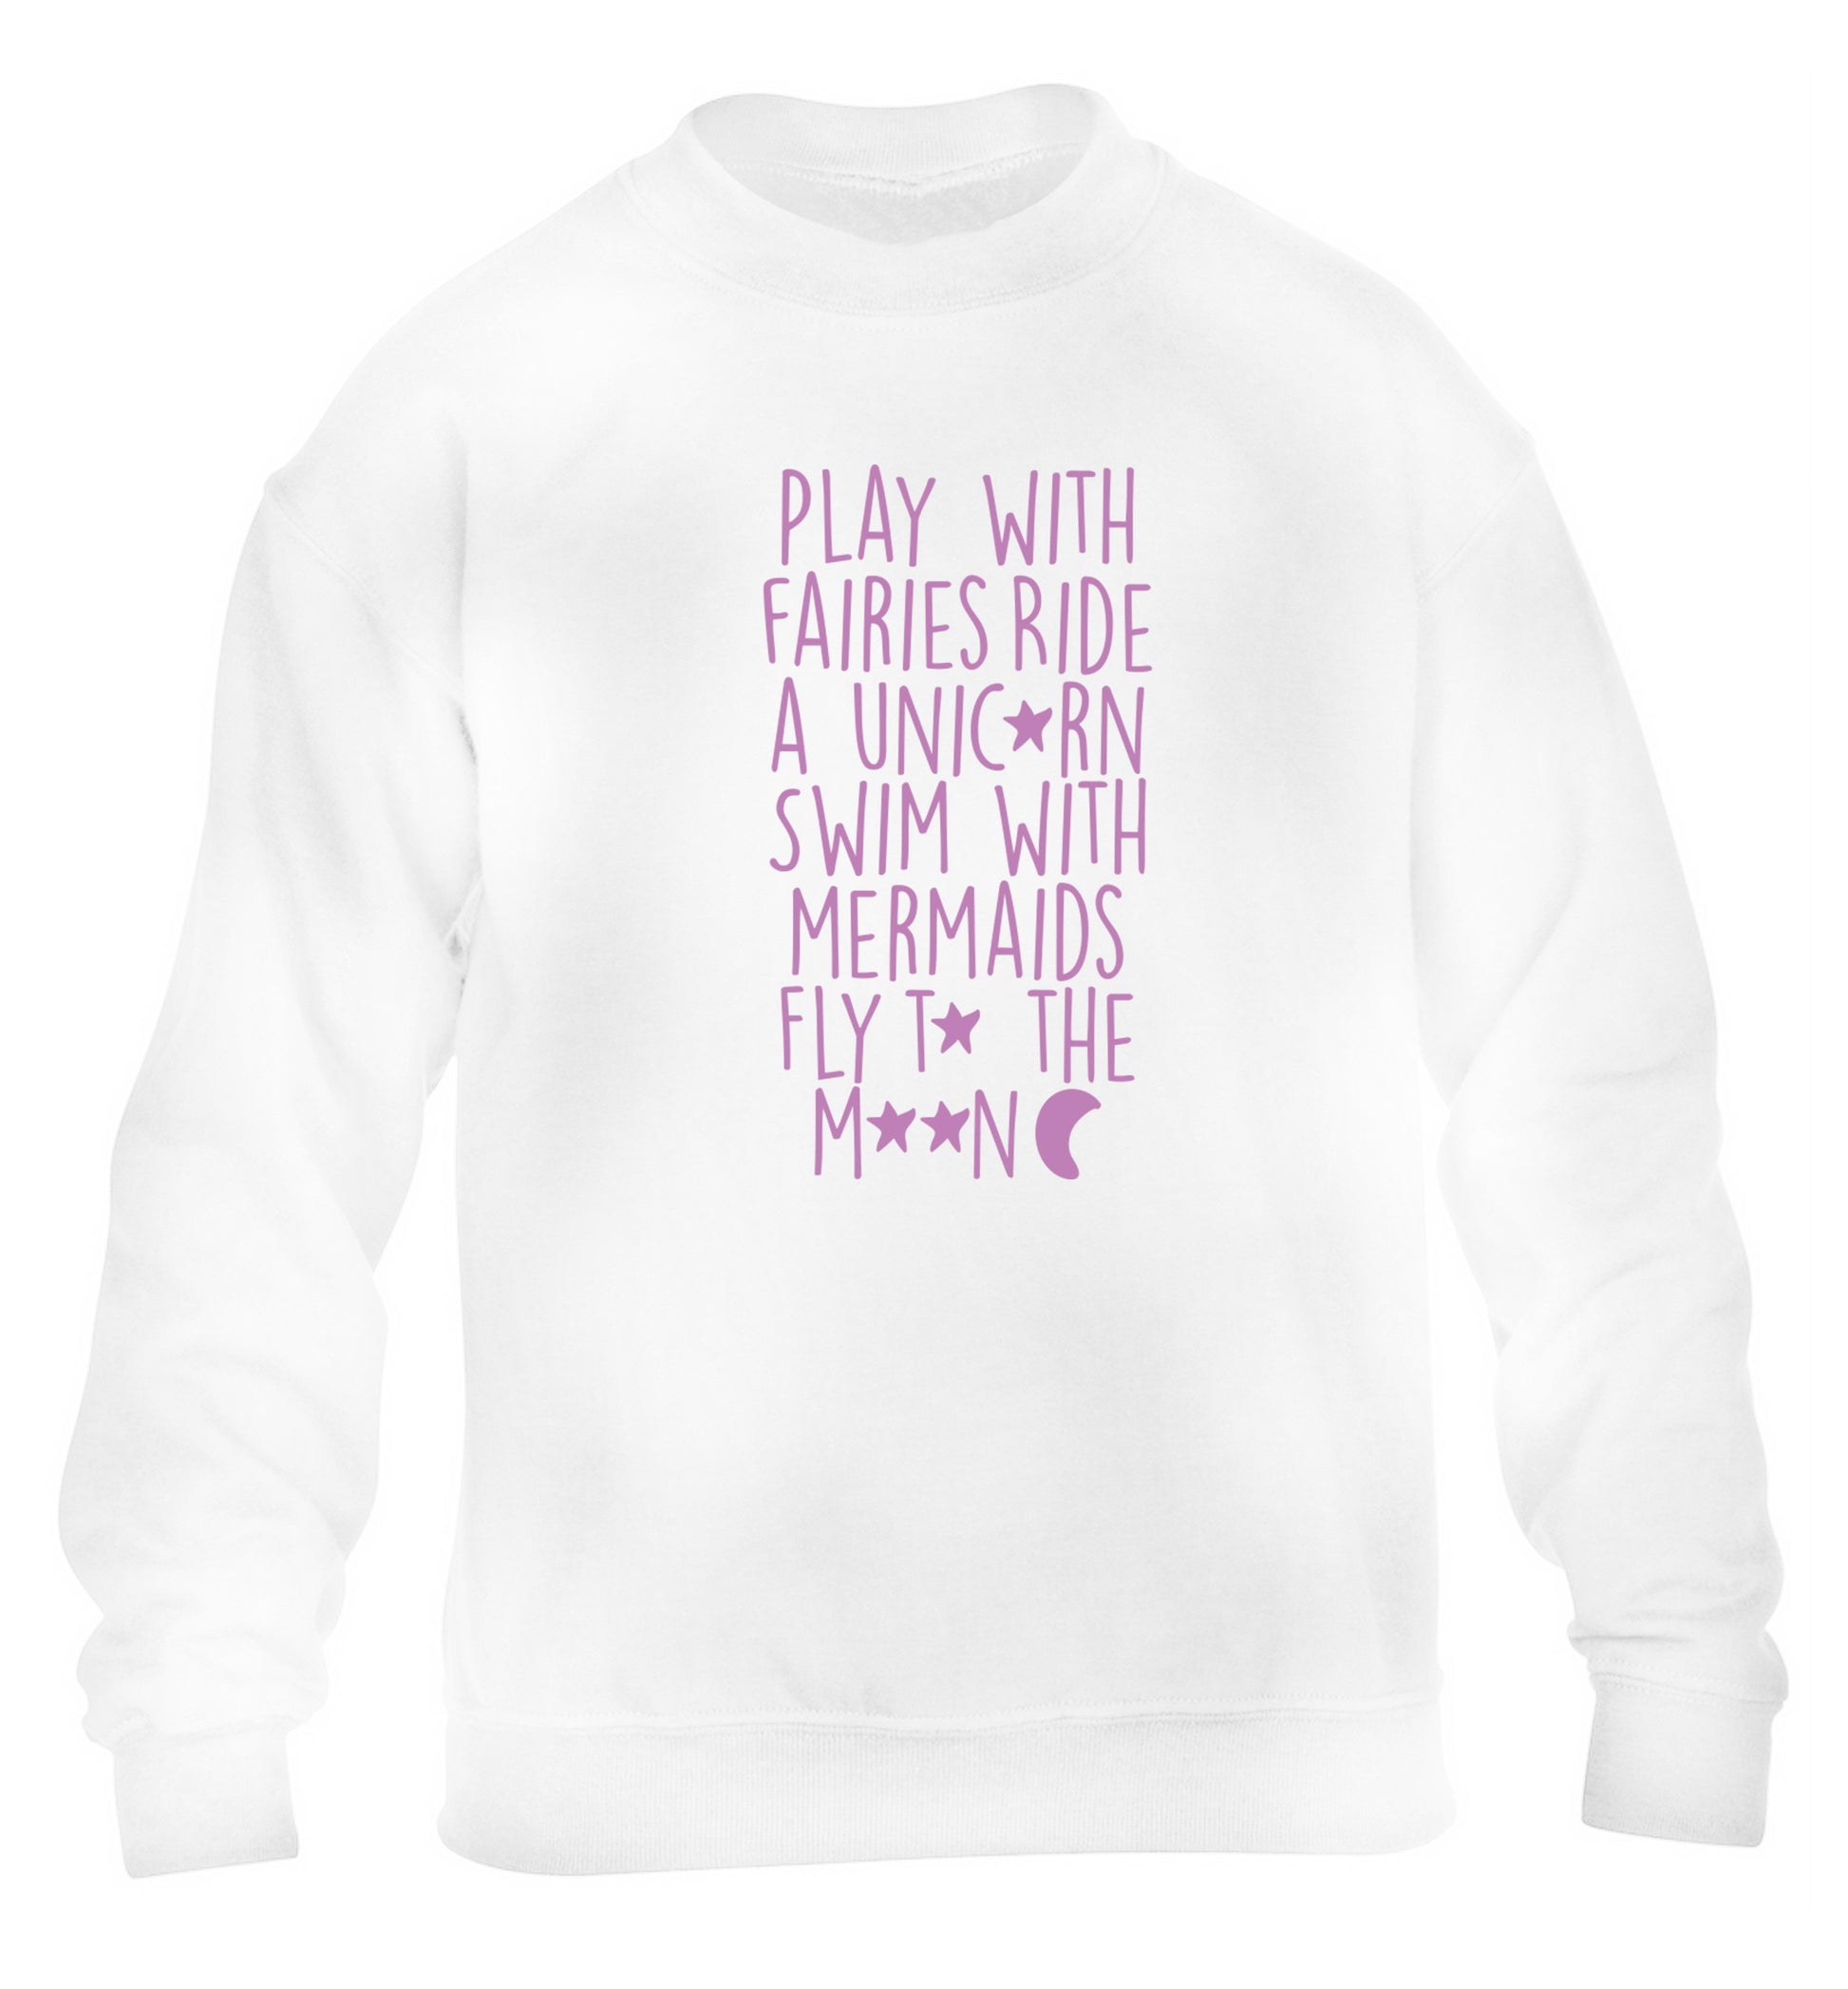 Play with fairies ride a unicorn swim with mermaids fly to the moon children's white sweater 12-14 Years